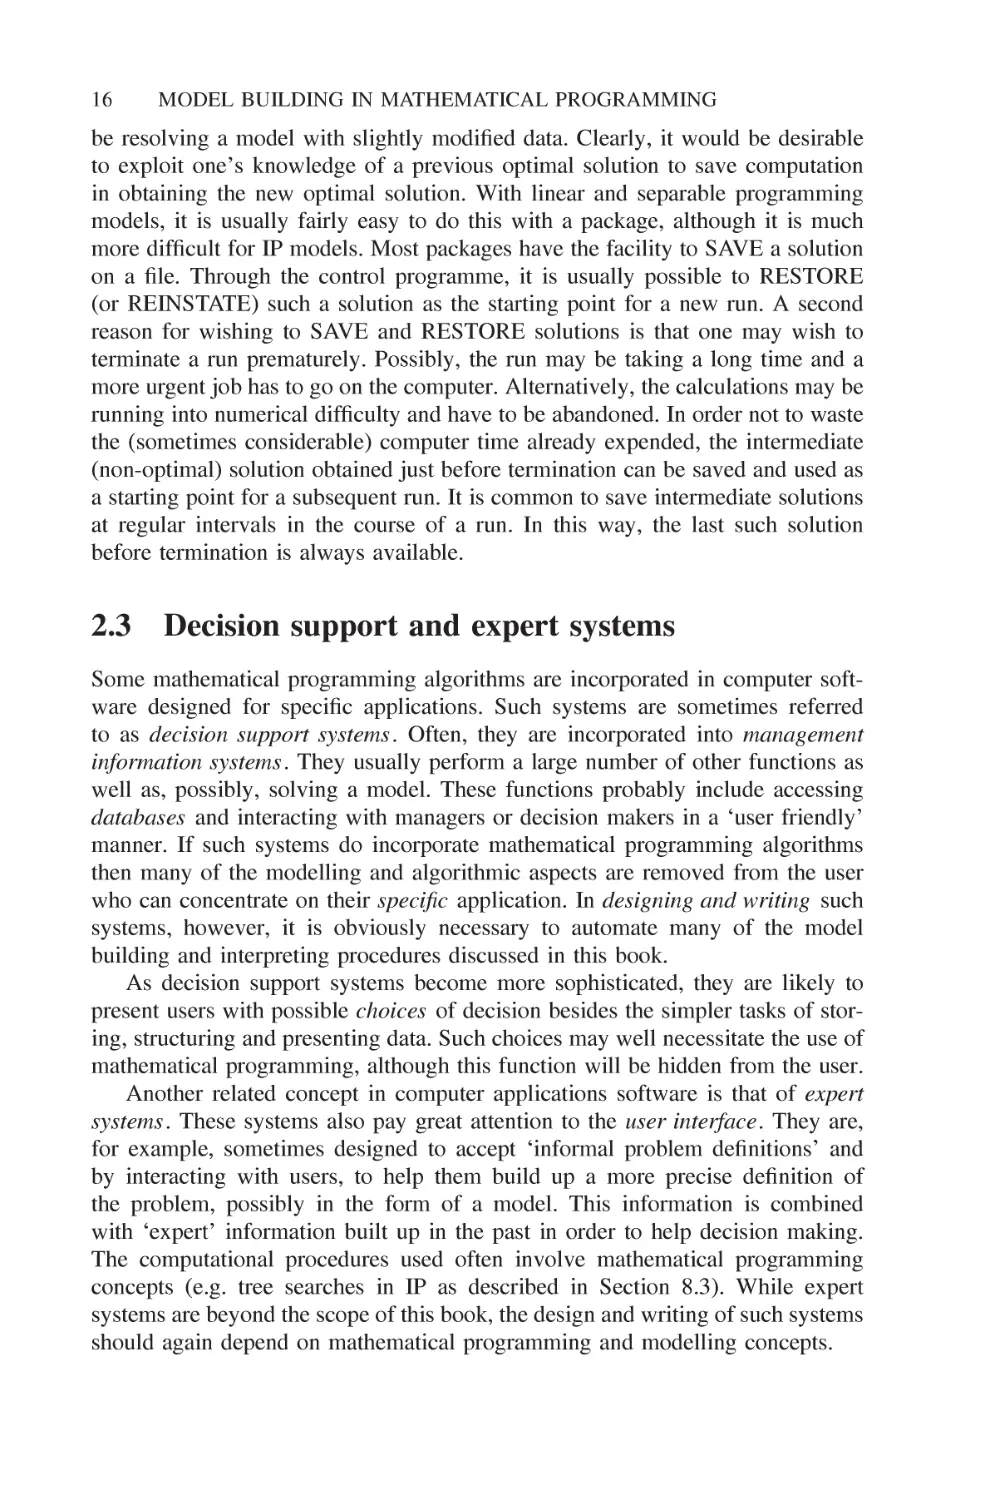 2.3 Decision support and expert systems